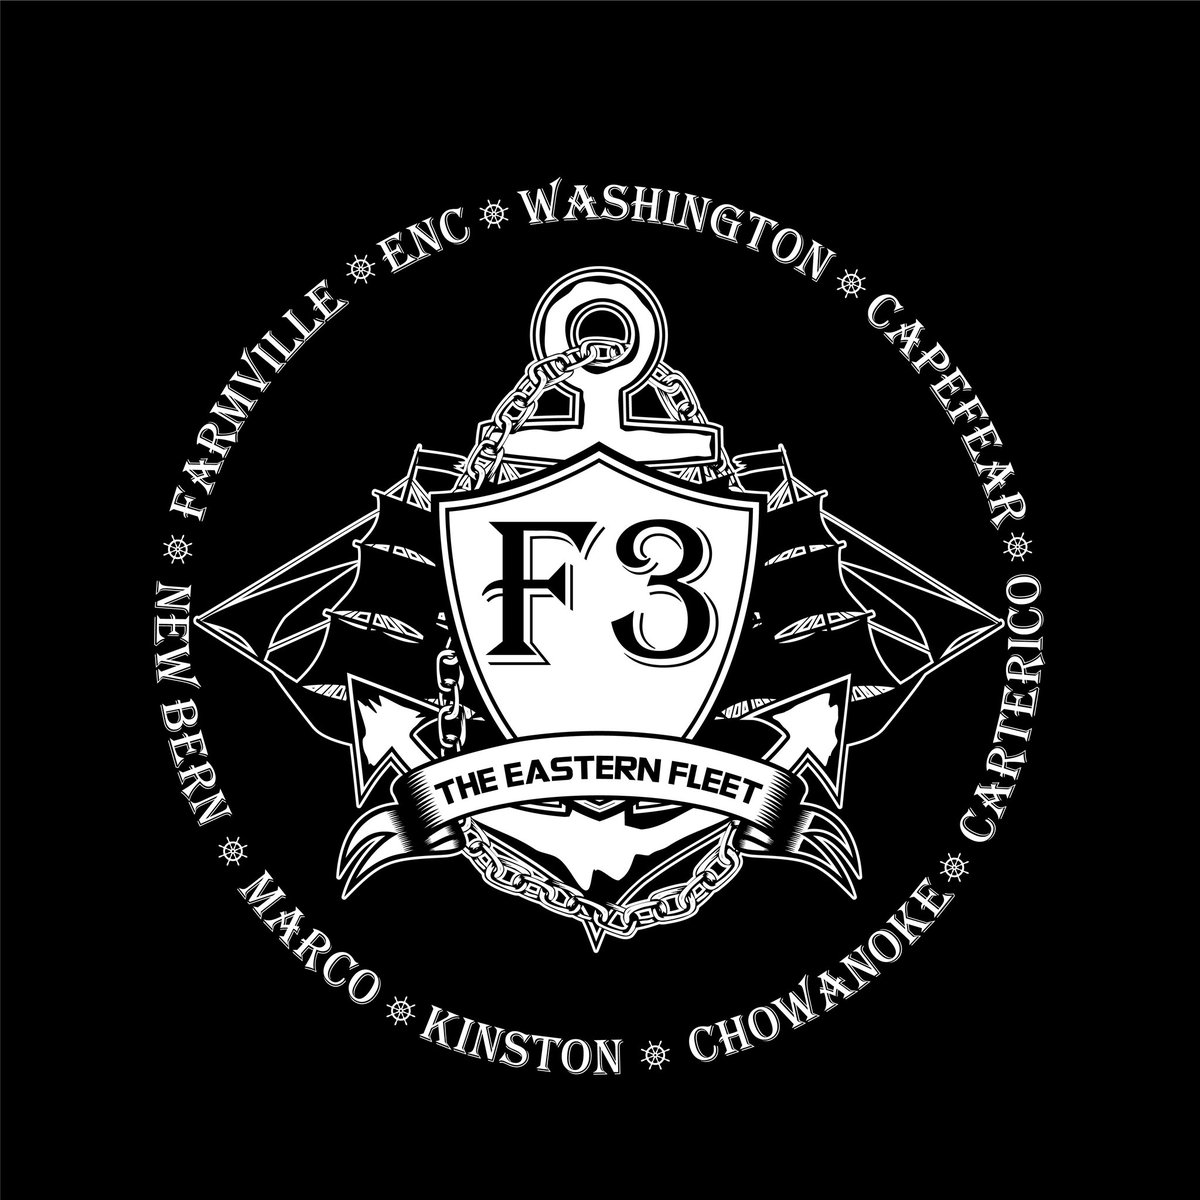 Our @f3marconc brothers from #theeasternfleet celebrate their one year anniversary tomorrow!  What other pirates from the east will show up for support?